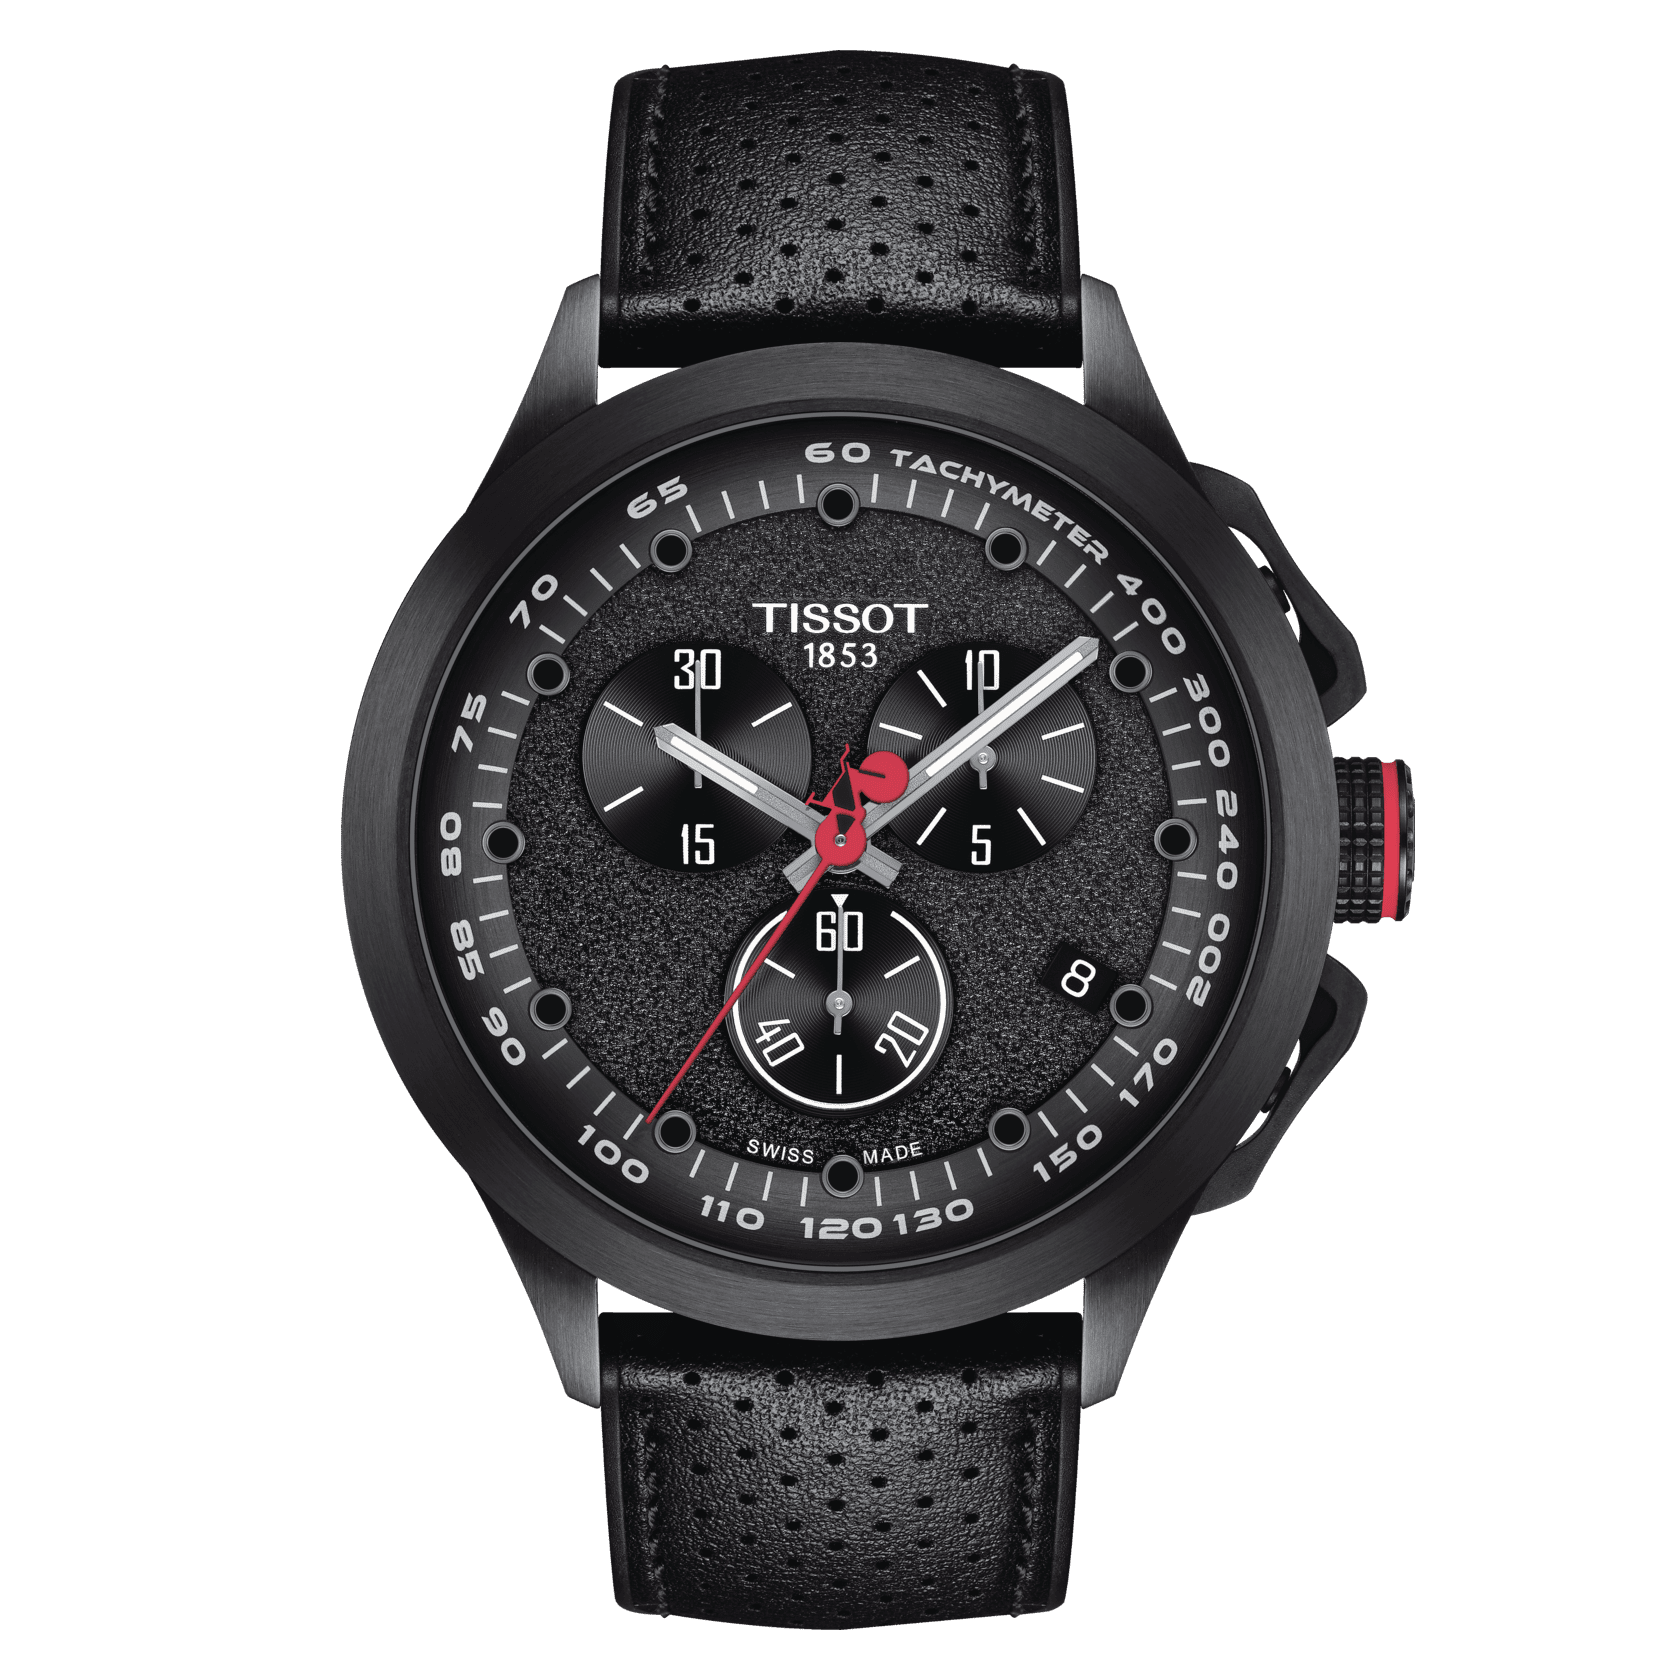 Tissot T-Race Cycling Giro d'Italia  2022 Special Edition